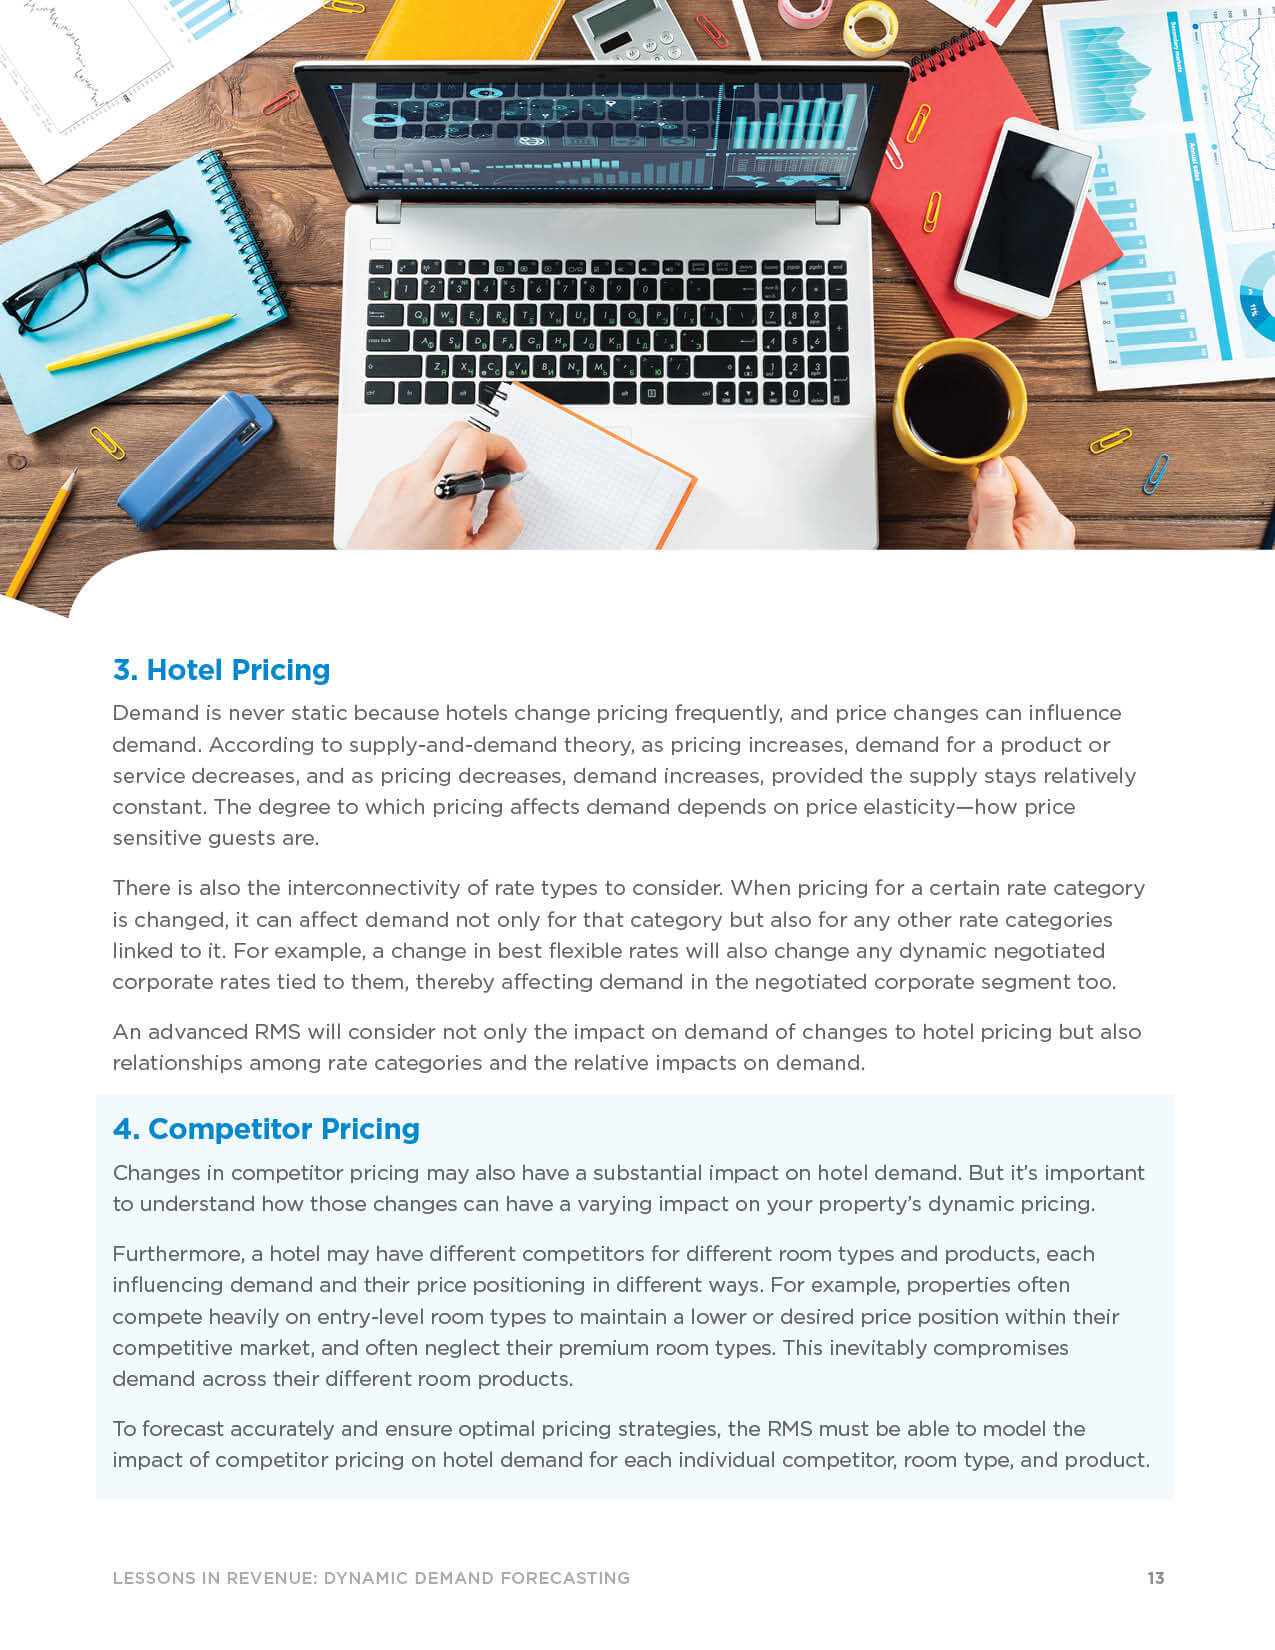 Page 13 - 7 Key Considerations in Dynamic Demand Forecasting